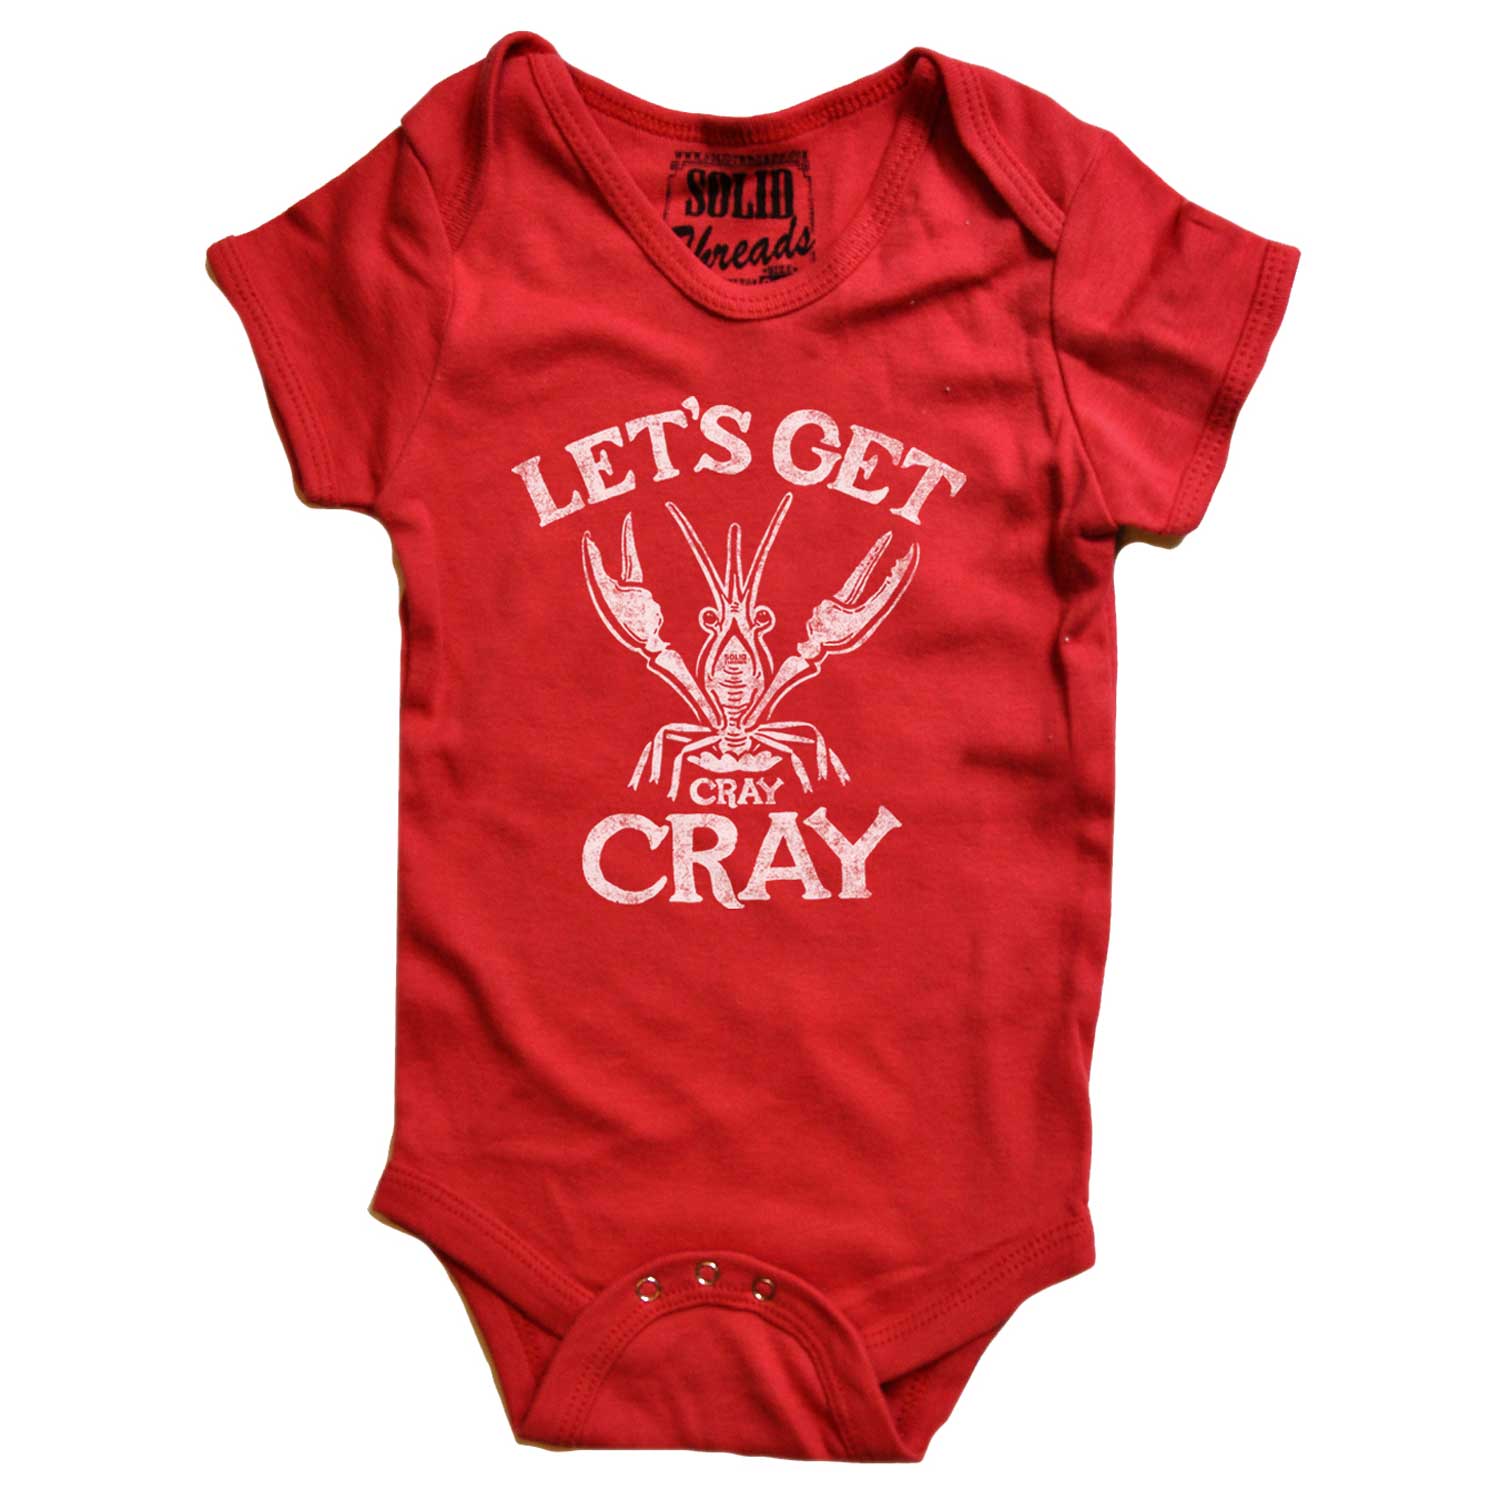 Baby Let's Get Cray Cray Cool Retro Beach Party One Piece | Funny Crawfish Romper | Solid Threads